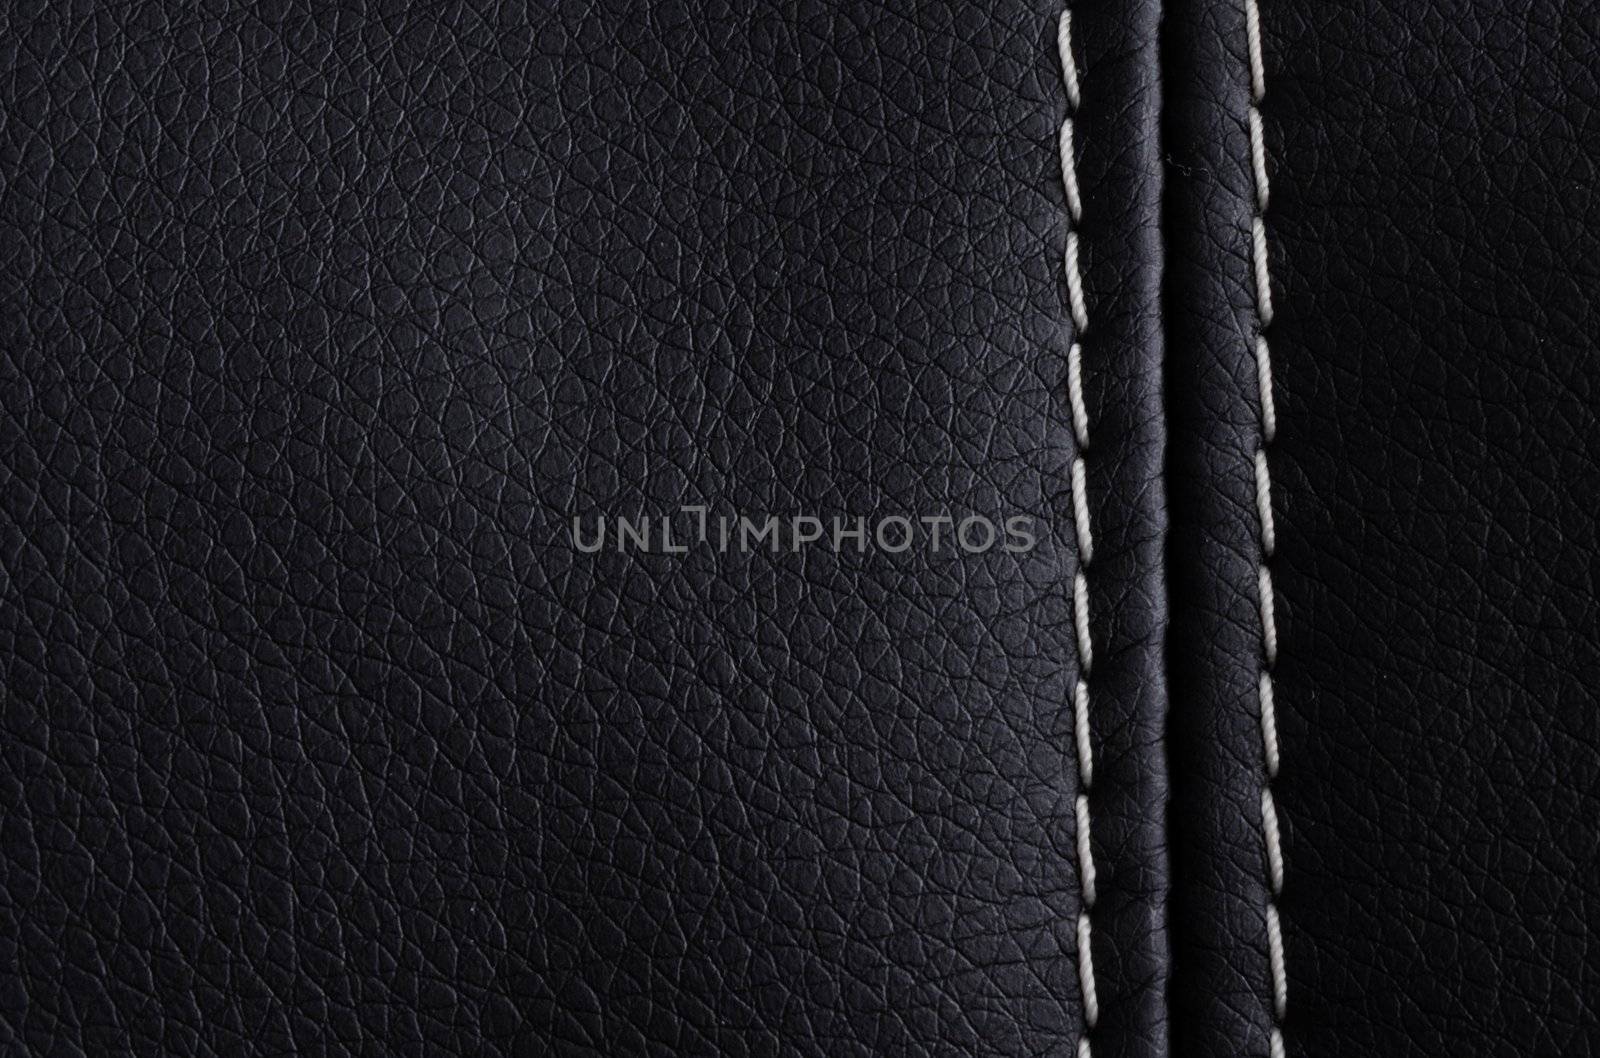 black leather texture background surface or wallpaper with copyspace